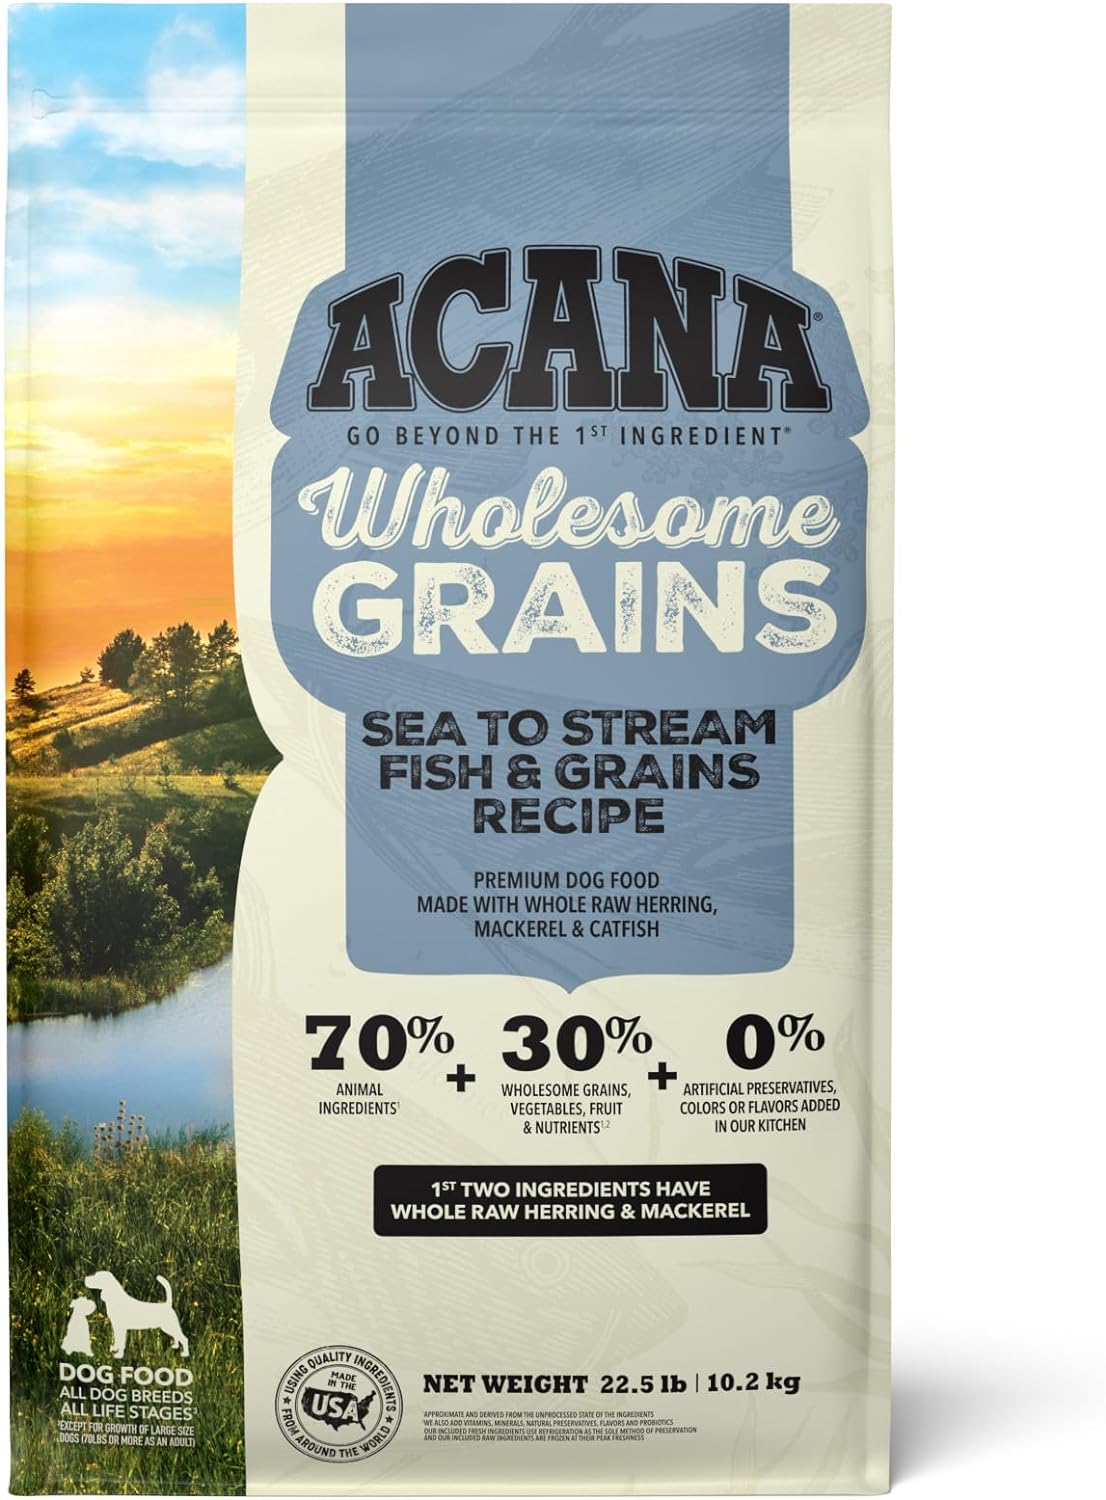 Acana Wholesome Grains Sea to Stream Fish & Grains Recipe Dry Dog Food – Gallery Image 1